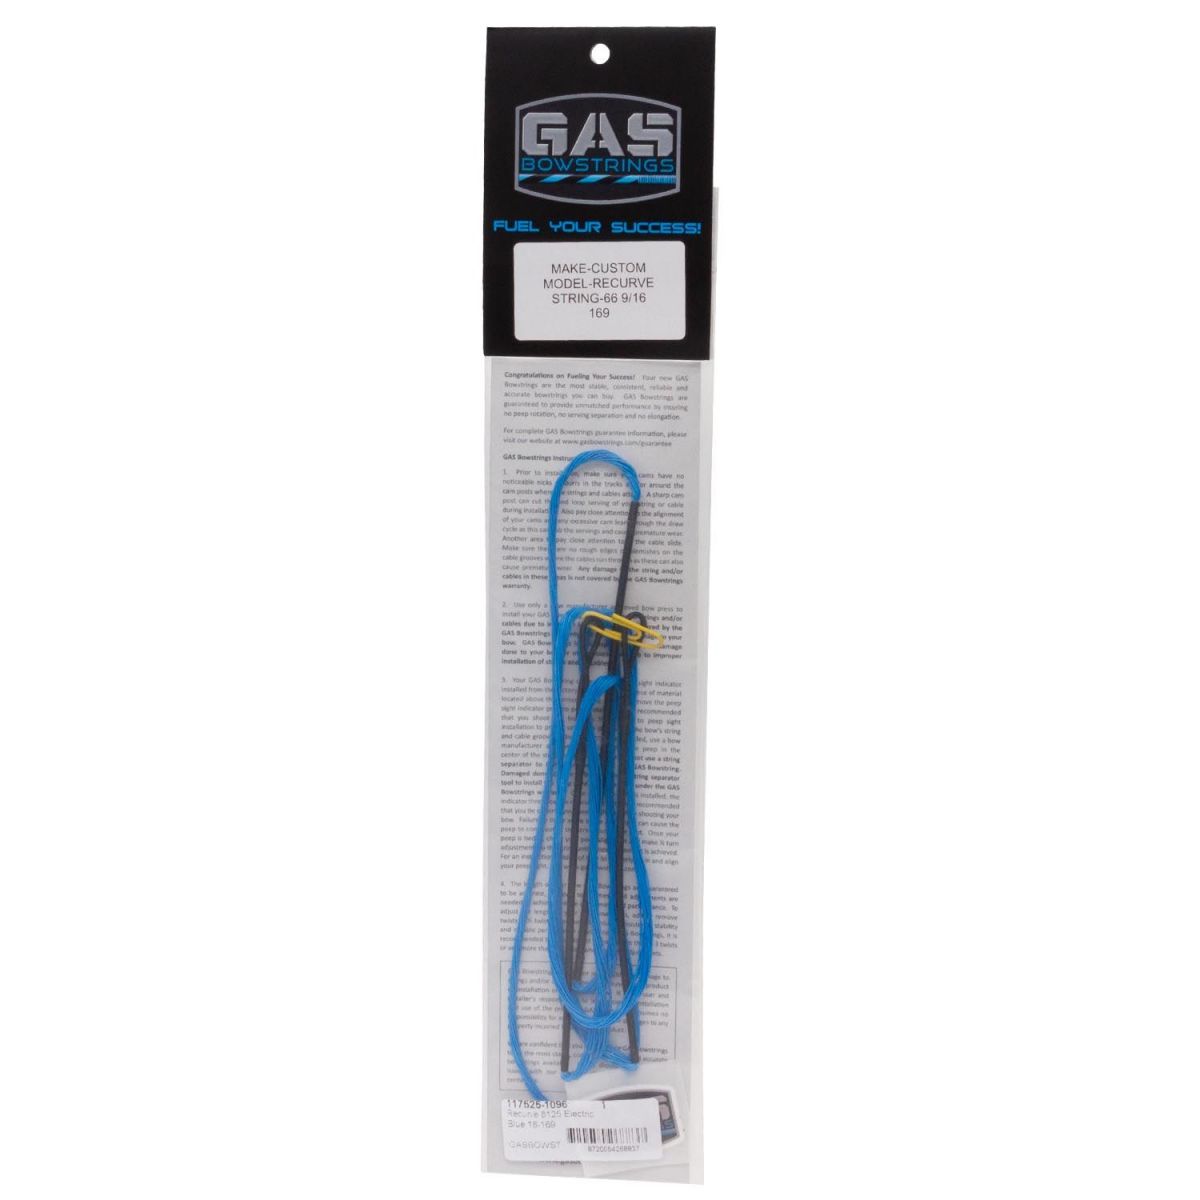 GAS Bowstrings Recurvesehne 8125 Electric Blue